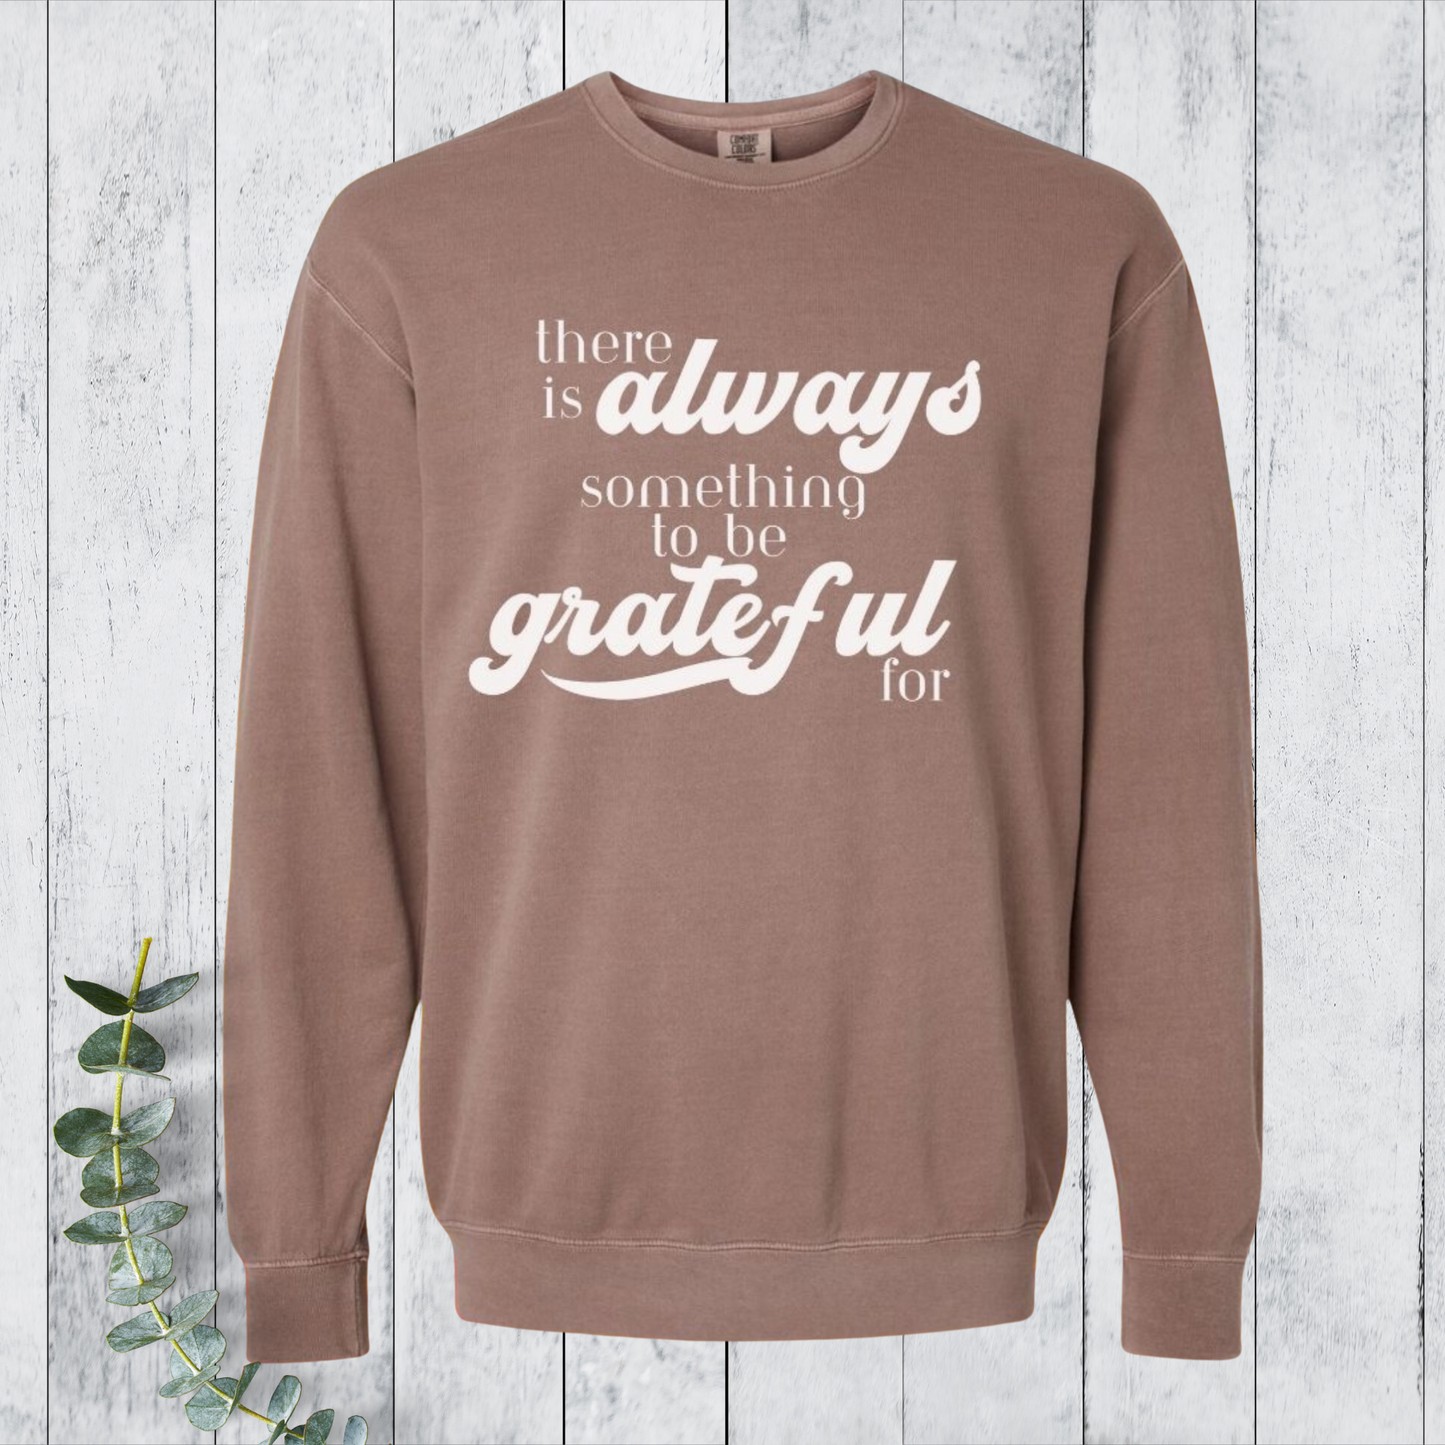 charity shirt, donating proceeds to community food programs, espresso sweatshirt with white text "there is always something to be grateful for"